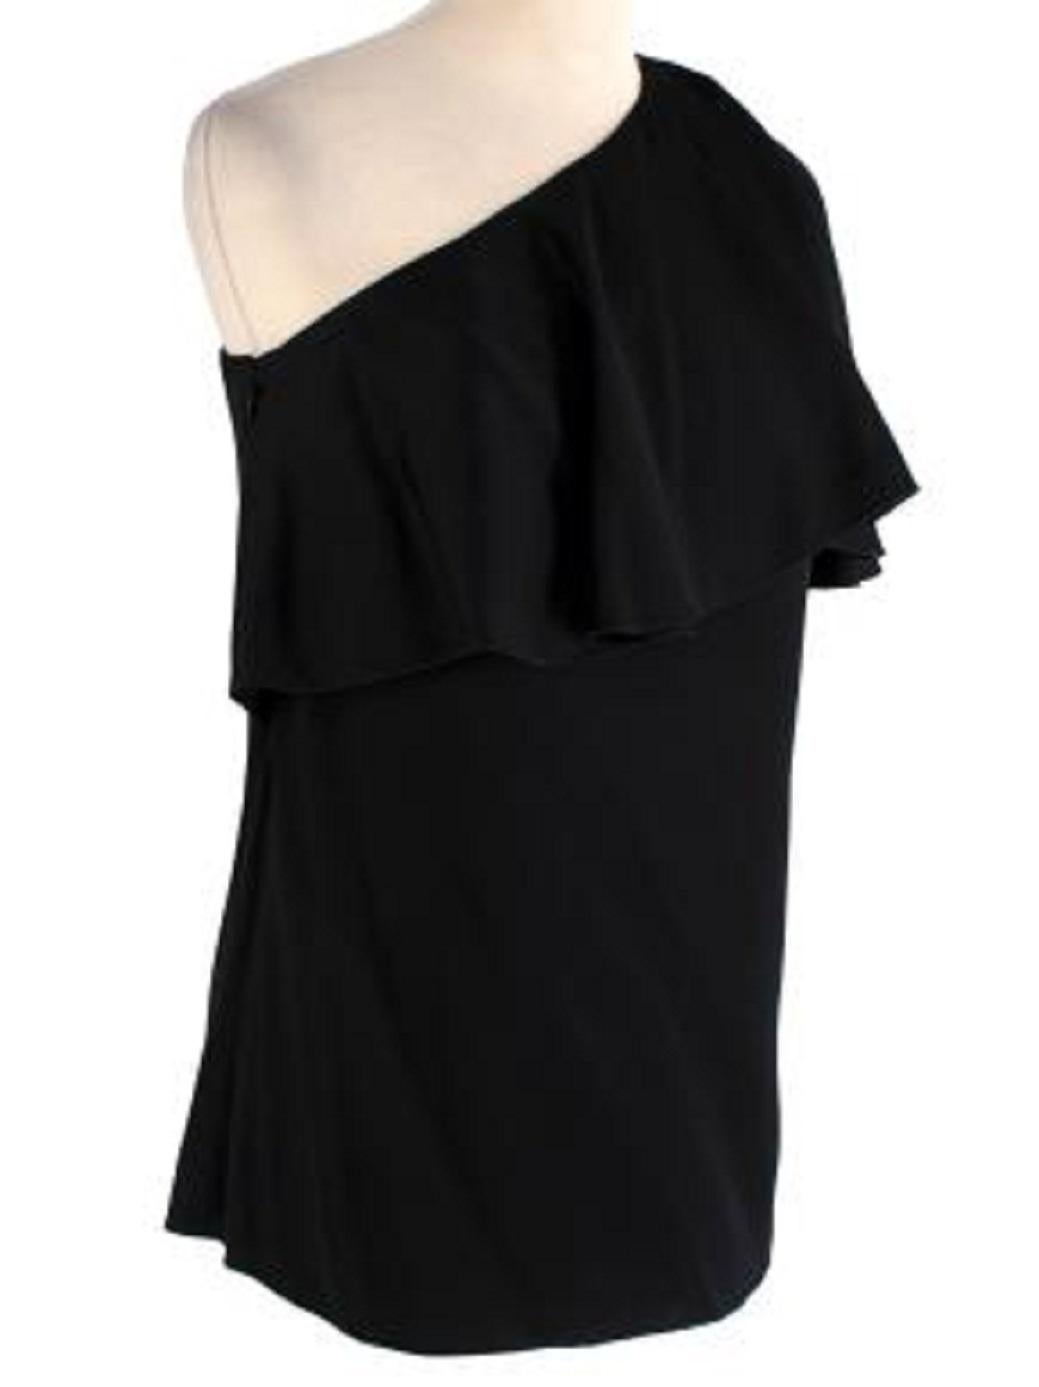 Lanvin Black crepe one-shoulder top In Excellent Condition For Sale In London, GB